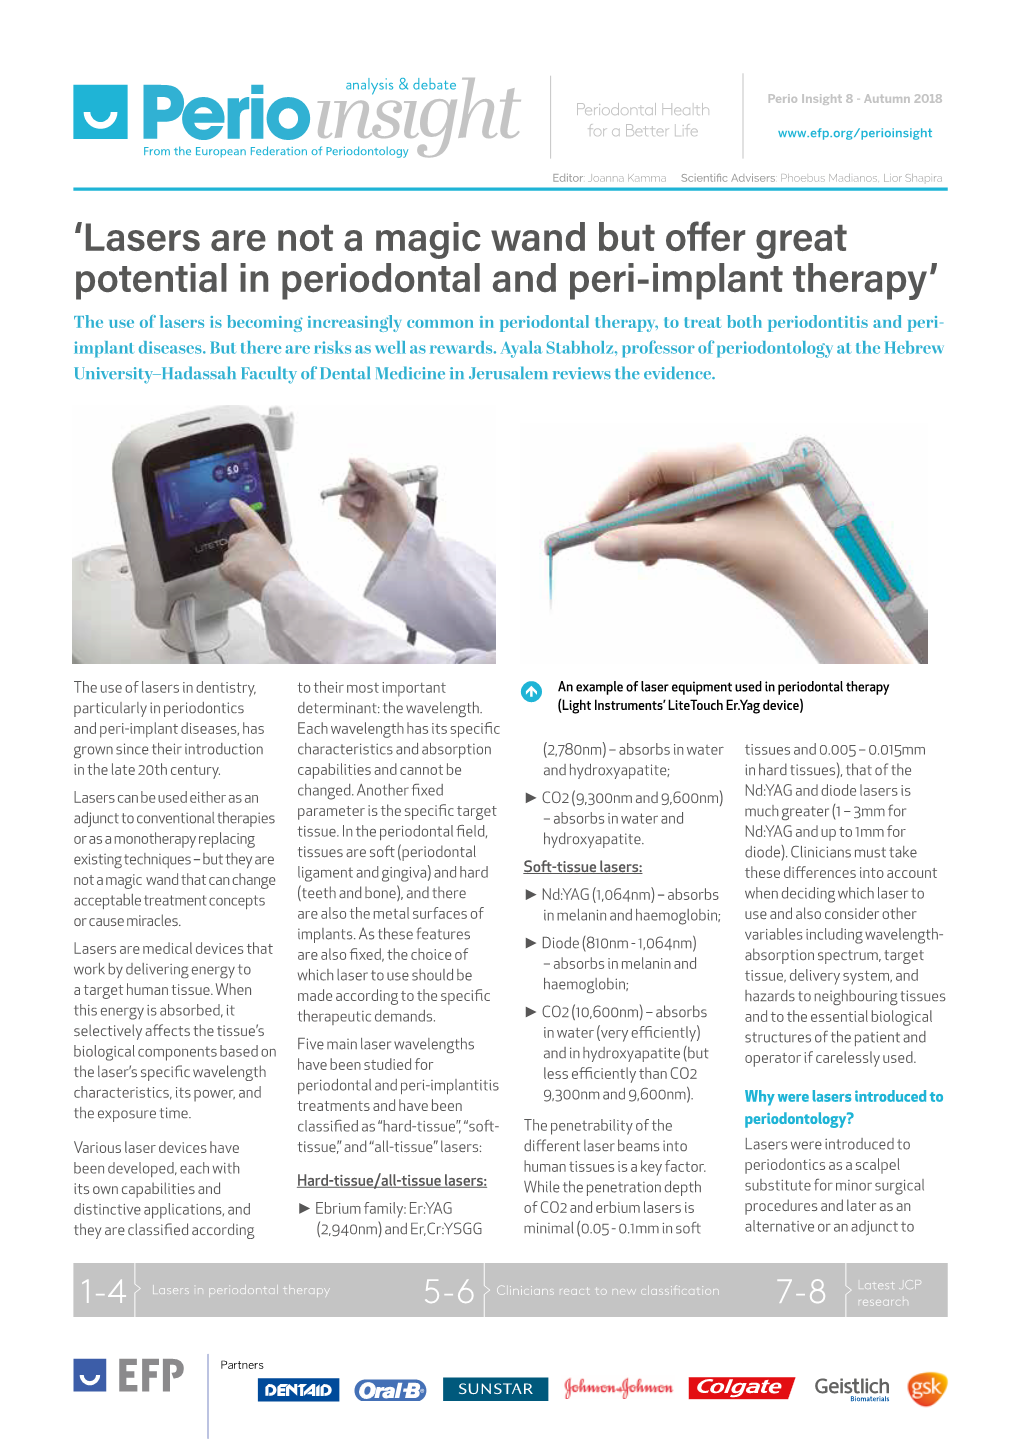 'Lasers Are Not a Magic Wand but Offer Great Potential in Periodontal And